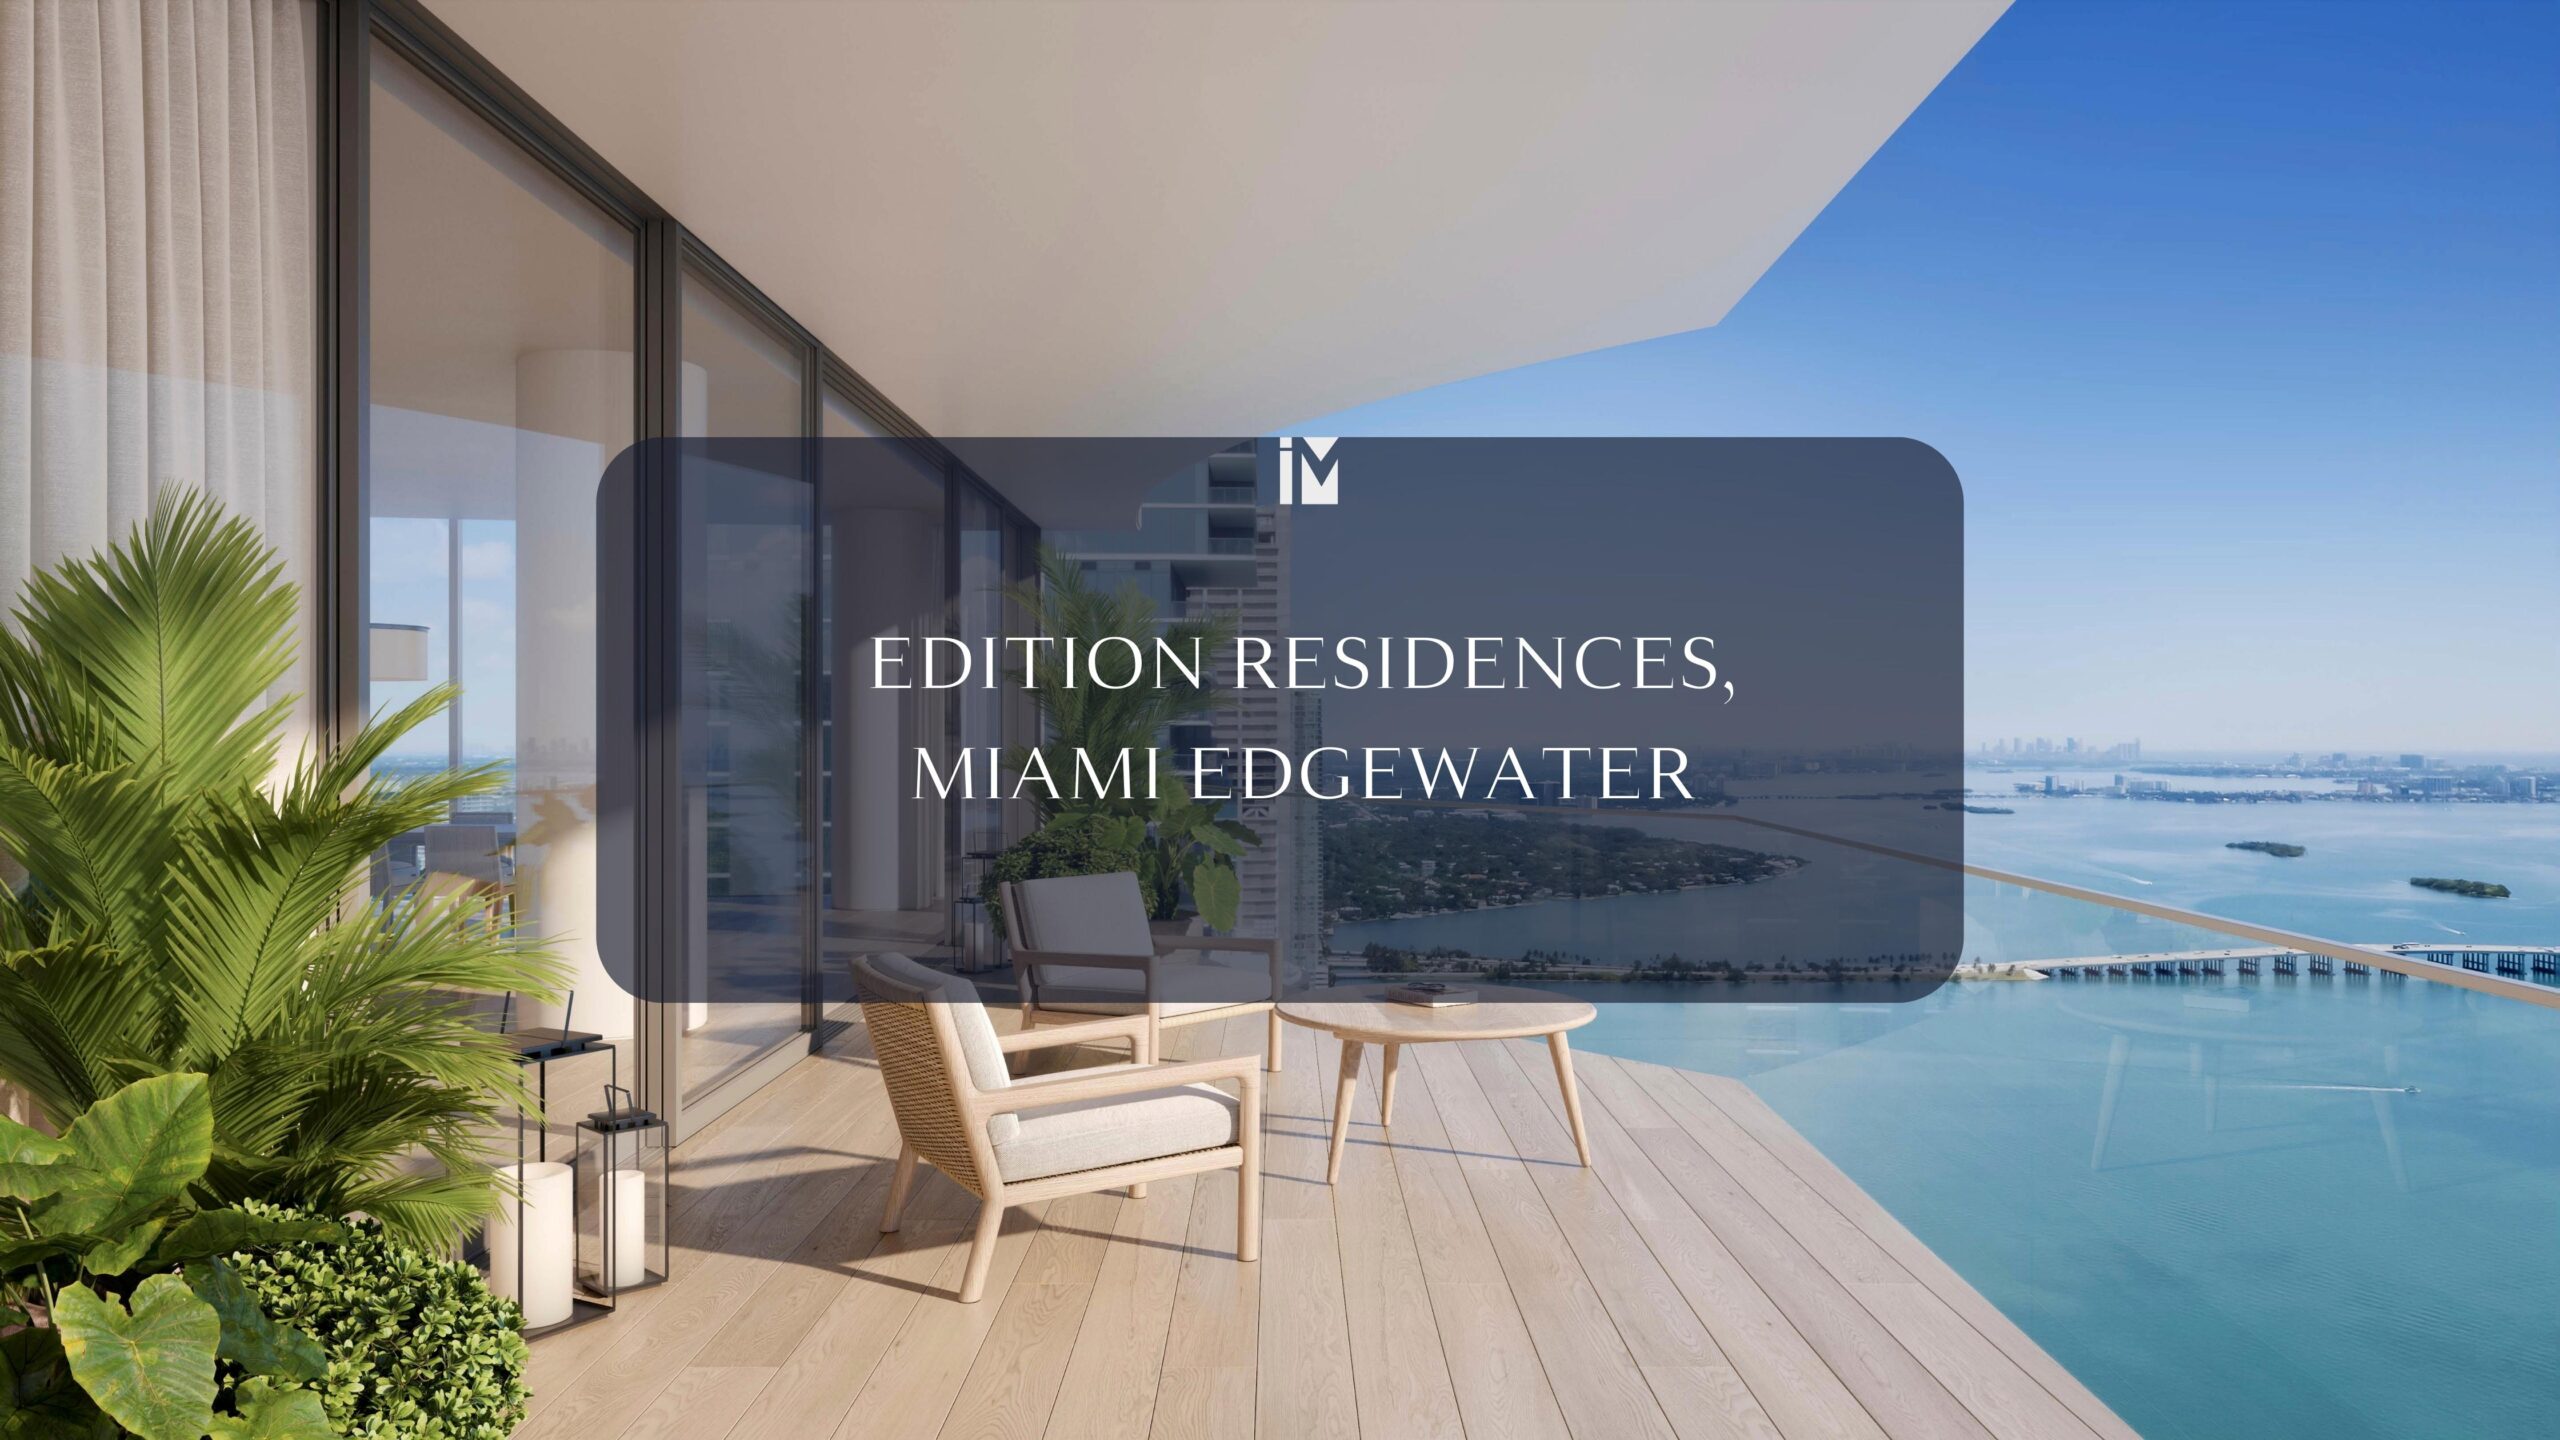 The First Of Its Kind: Edition Residences, Miami Edgewater